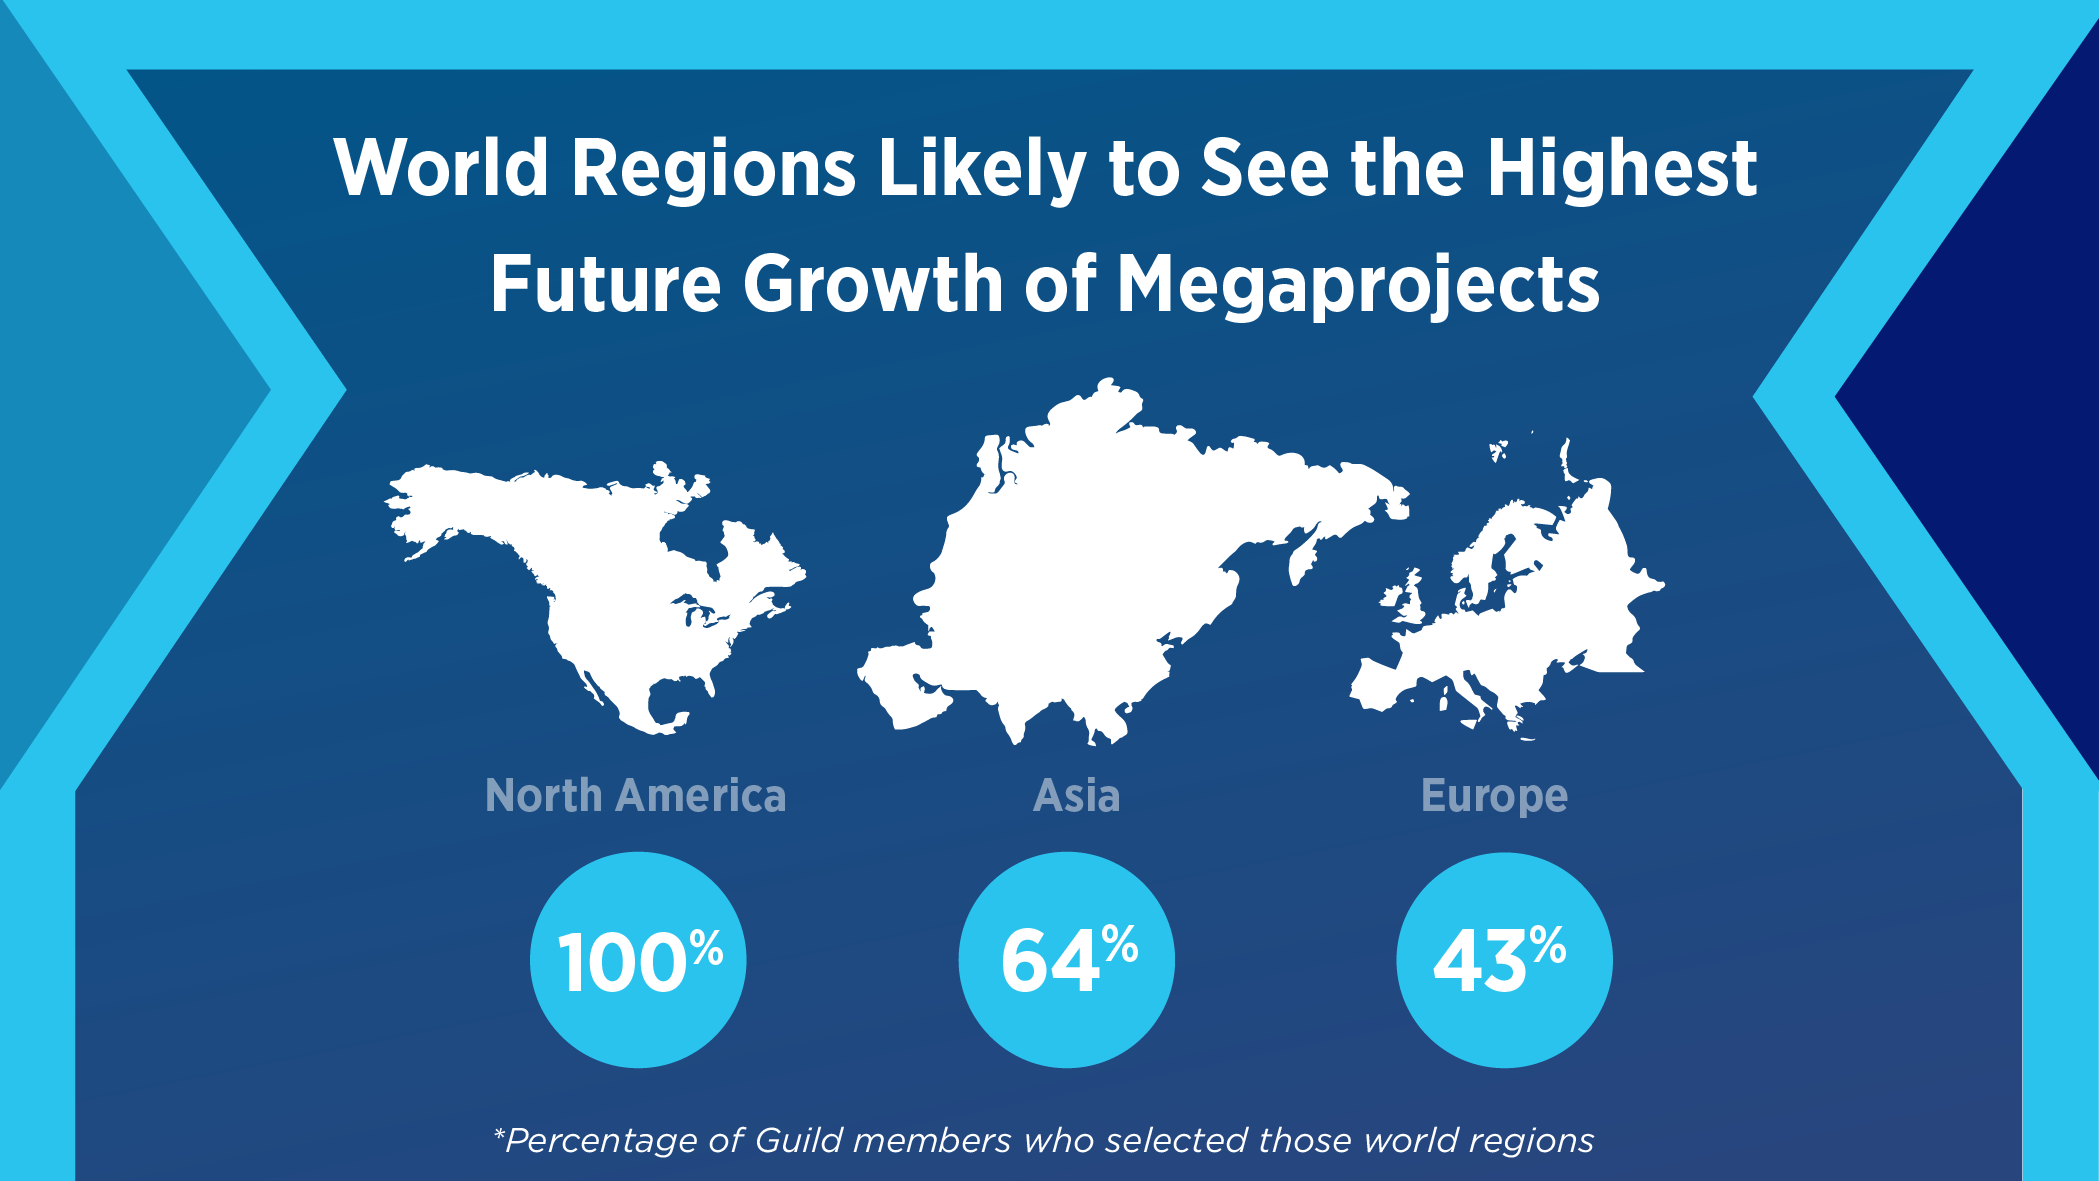 Map showing 100% believe North America will see growth of megaprojects